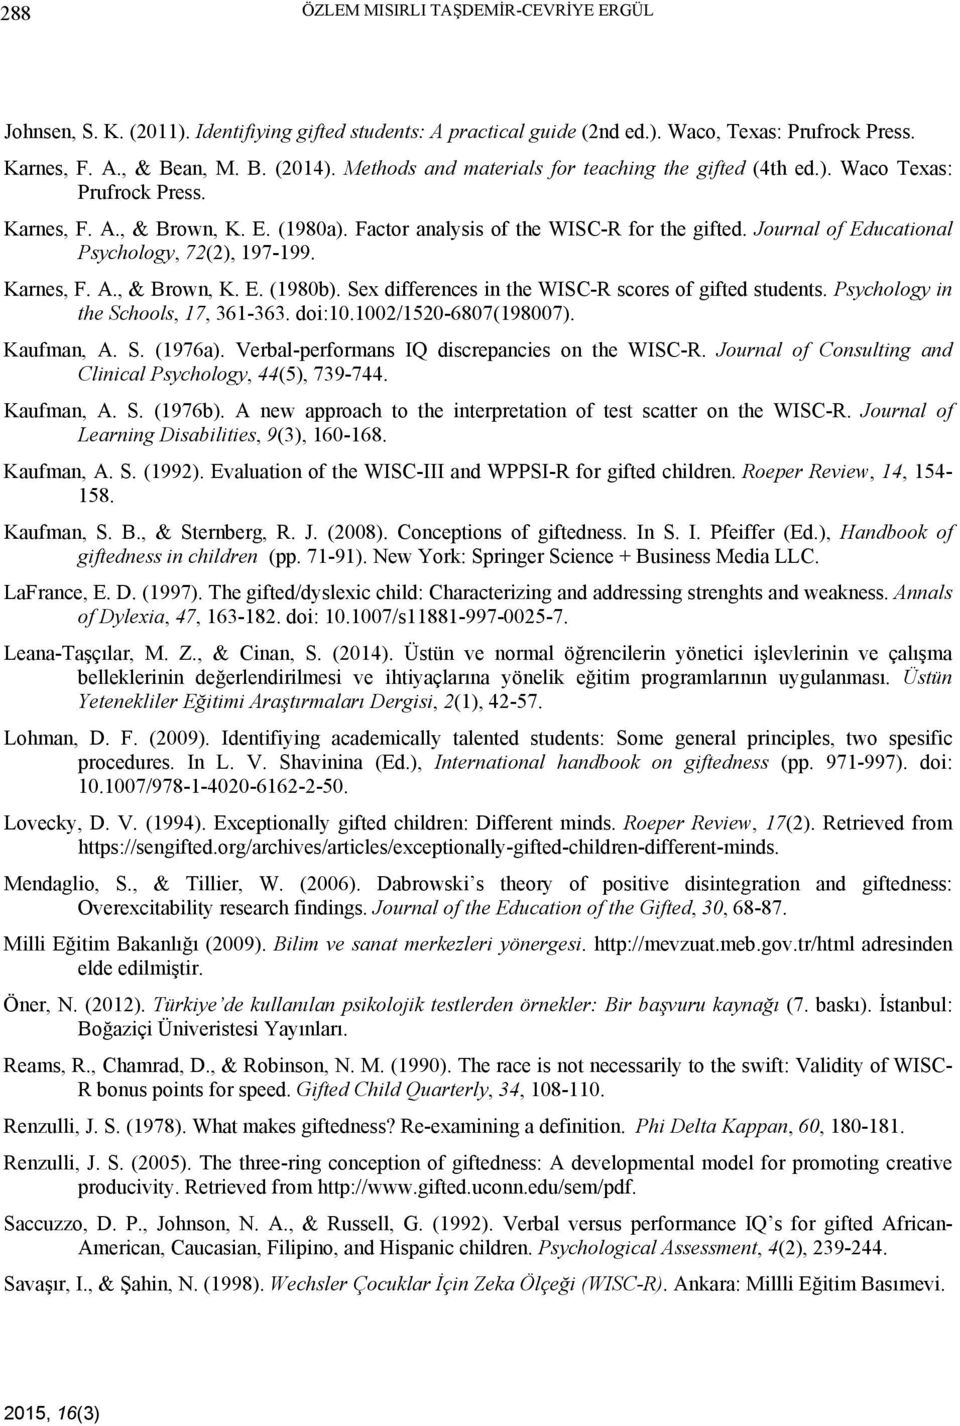 Journal of Educational Psychology, 72(2), 197-199. Karnes, F. A., & Brown, K. E. (1980b). Sex differences in the WISC-R scores of gifted students. Psychology in the Schools, 17, 361-363. doi:10.